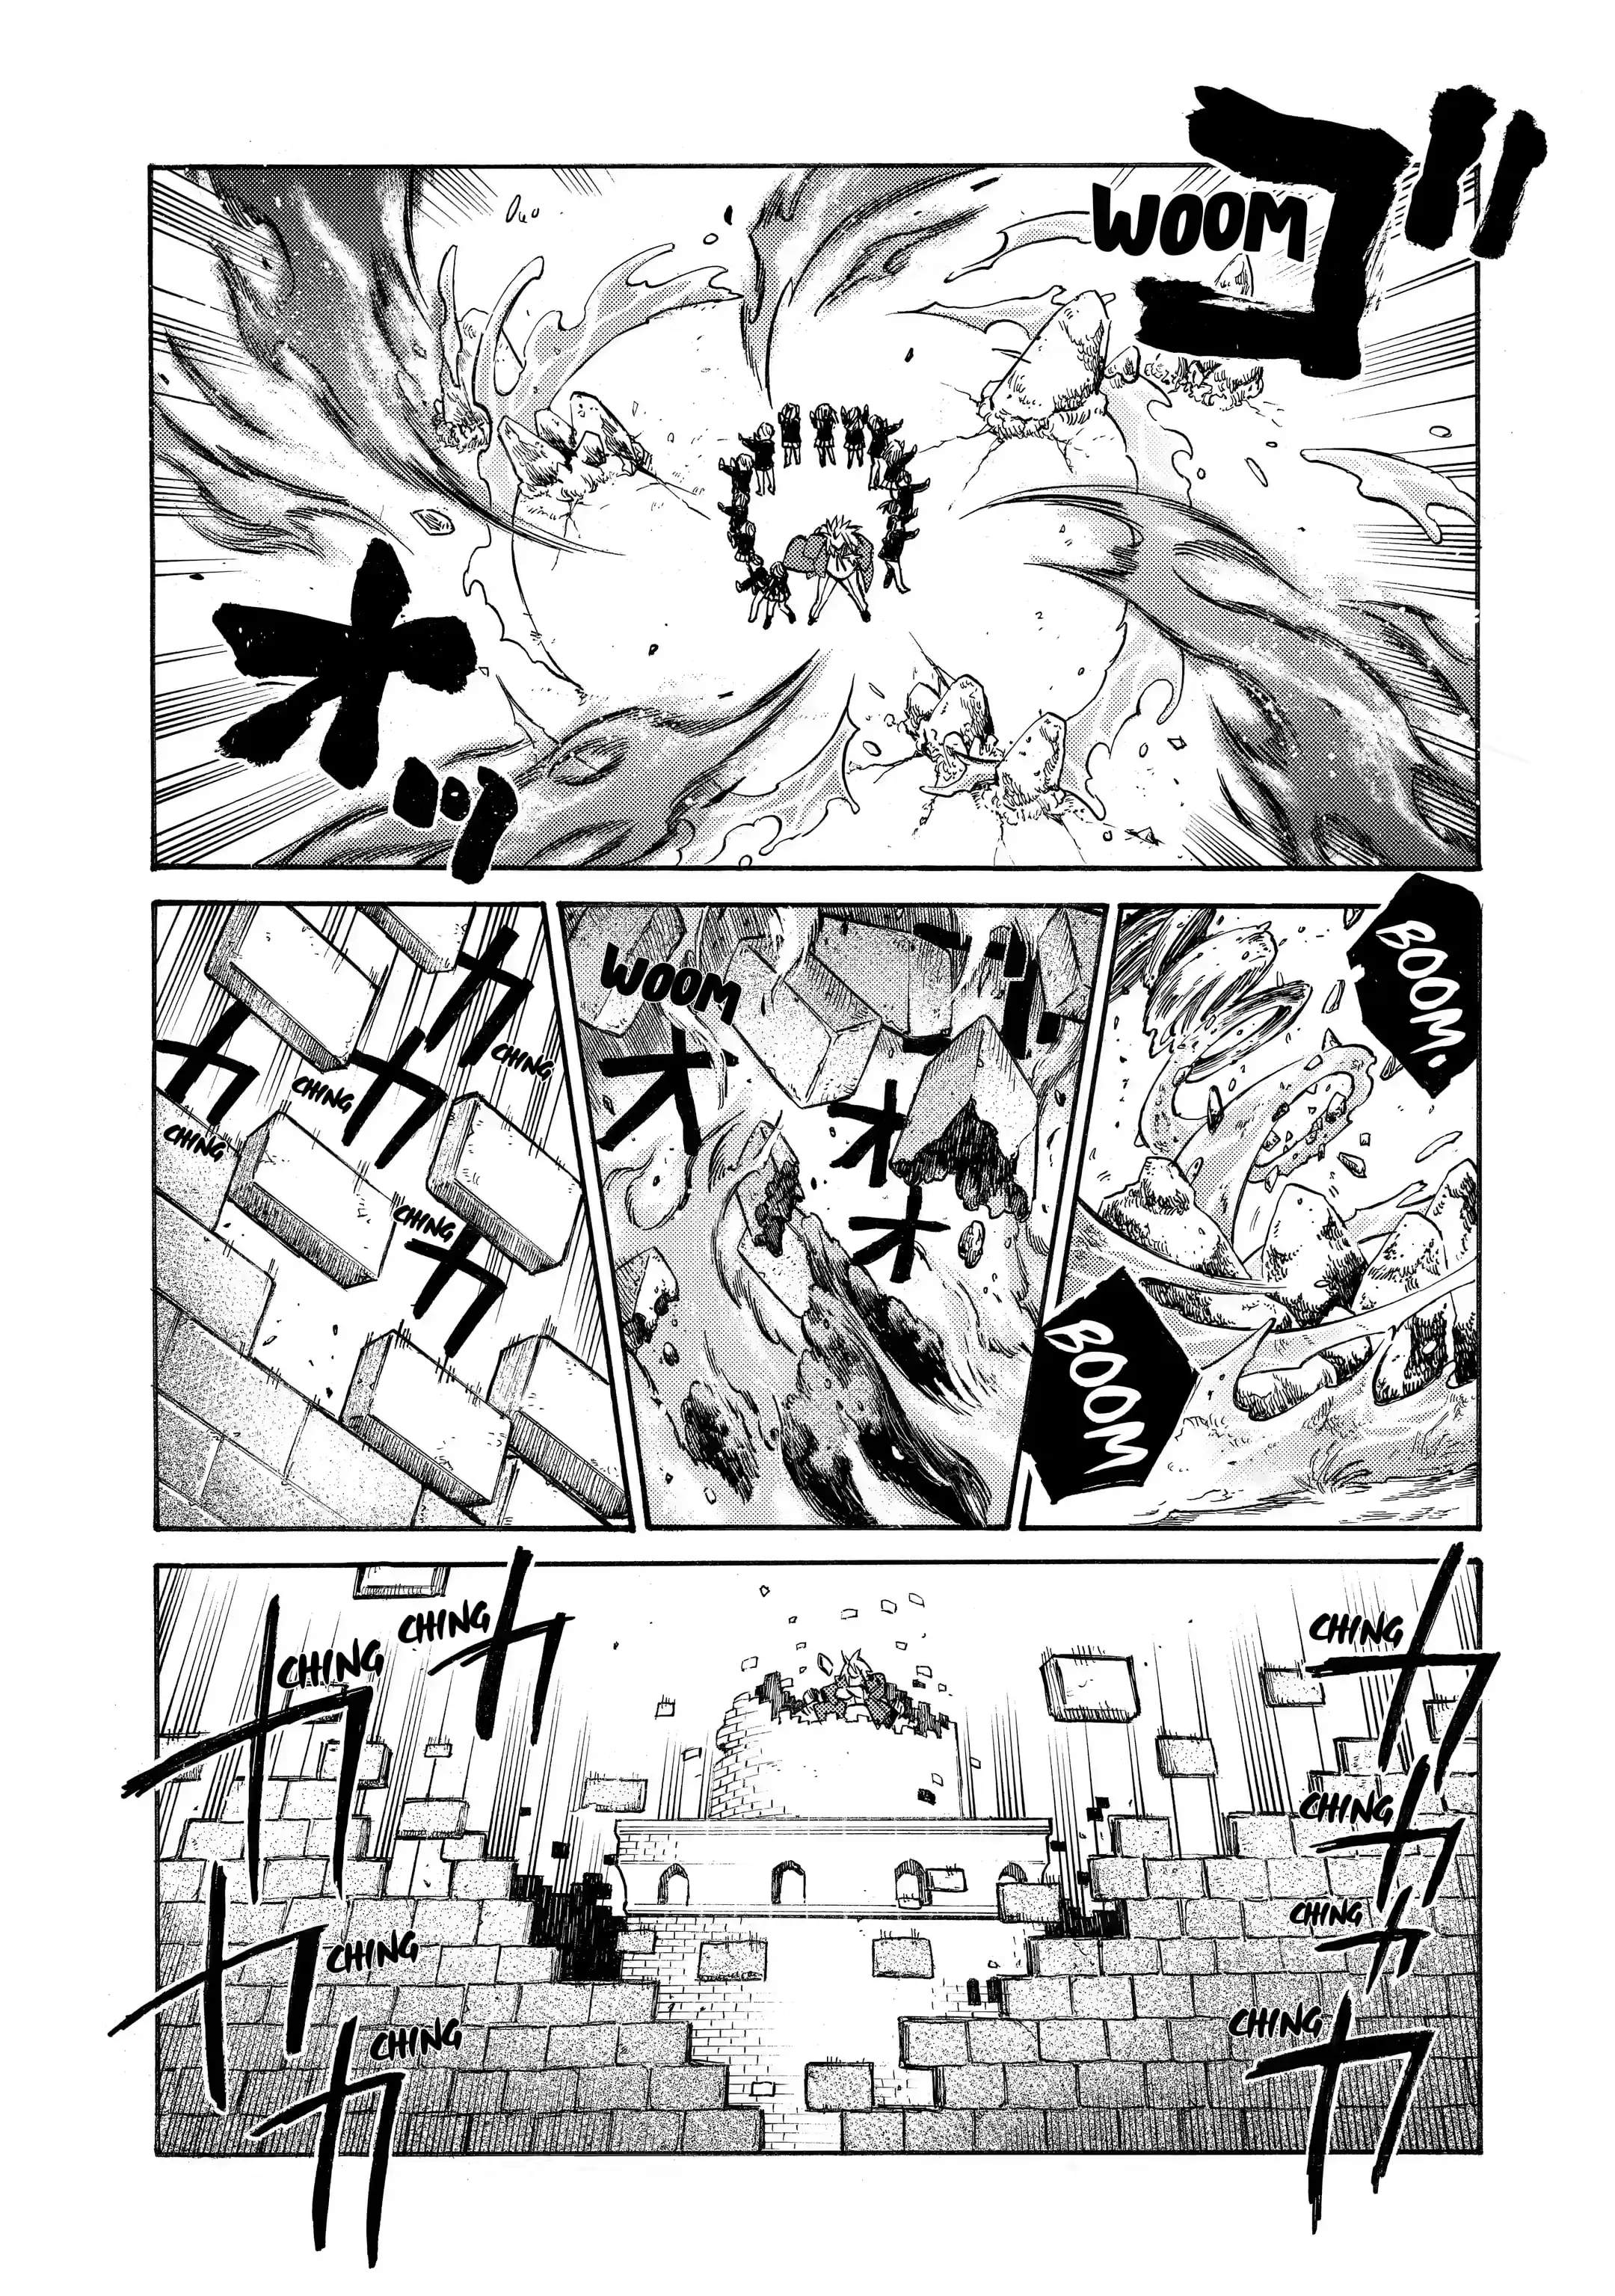 Reincarnation of the Unrivalled Time Mage: The Underachiever at the Magic Academy Turns Out to Be the Strongest Mage Who Controls Time! Chapter 14.4-eng-li - Page 8